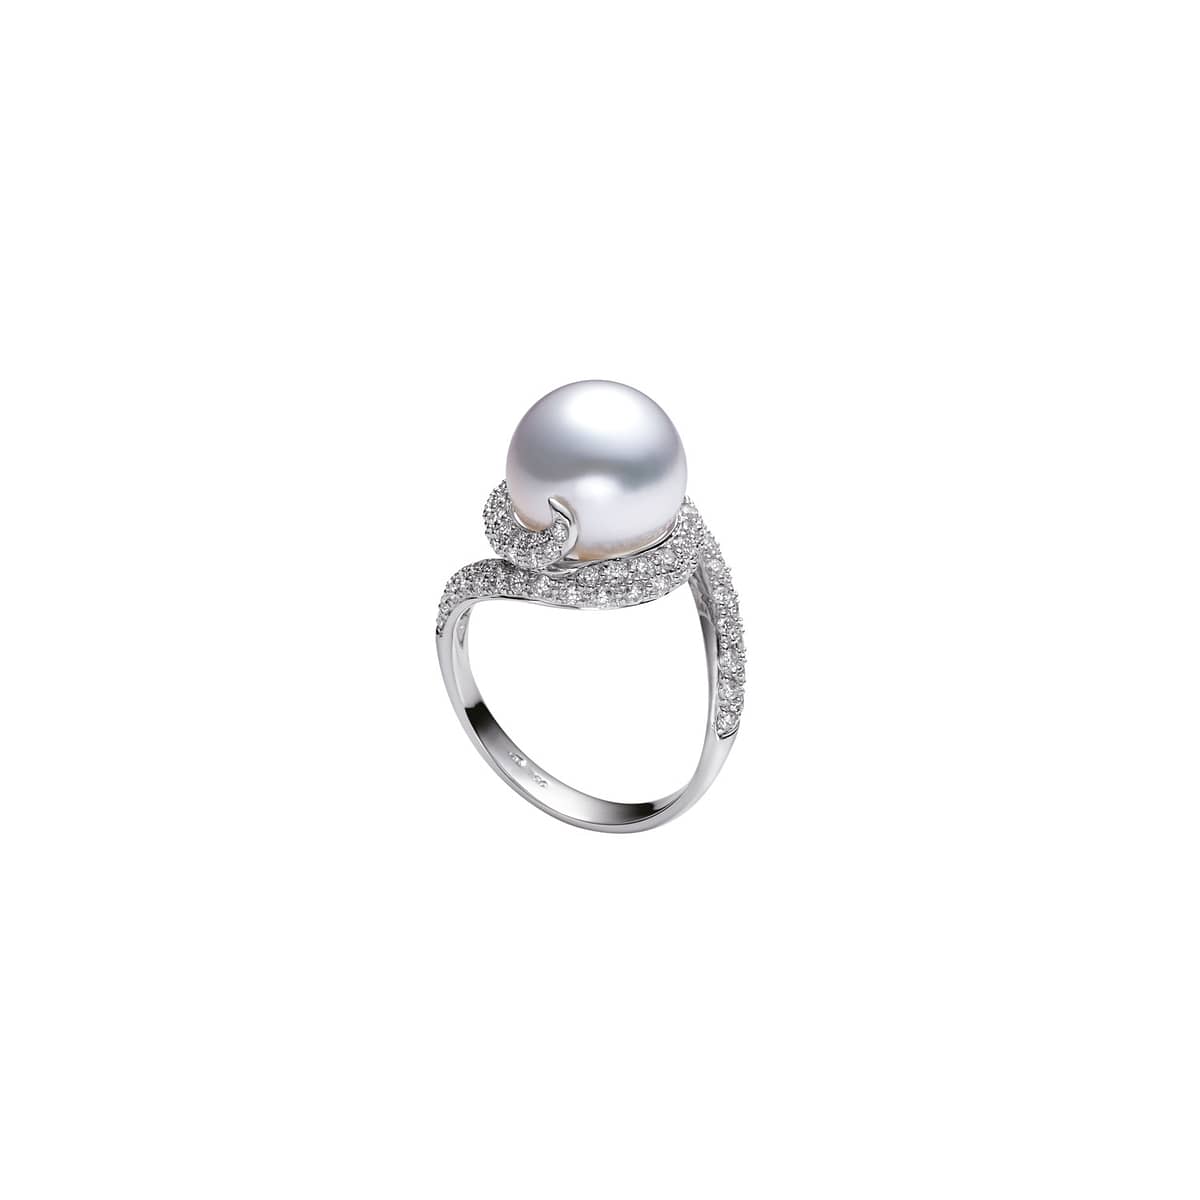 Mikimoto Rhapsody Ring with a 10-11mm White South Sea Cultured Pearl surrounded in a twist by 0.62 ct of Diamonds and set in 18K White Gold. A striking ring for that special occasion.